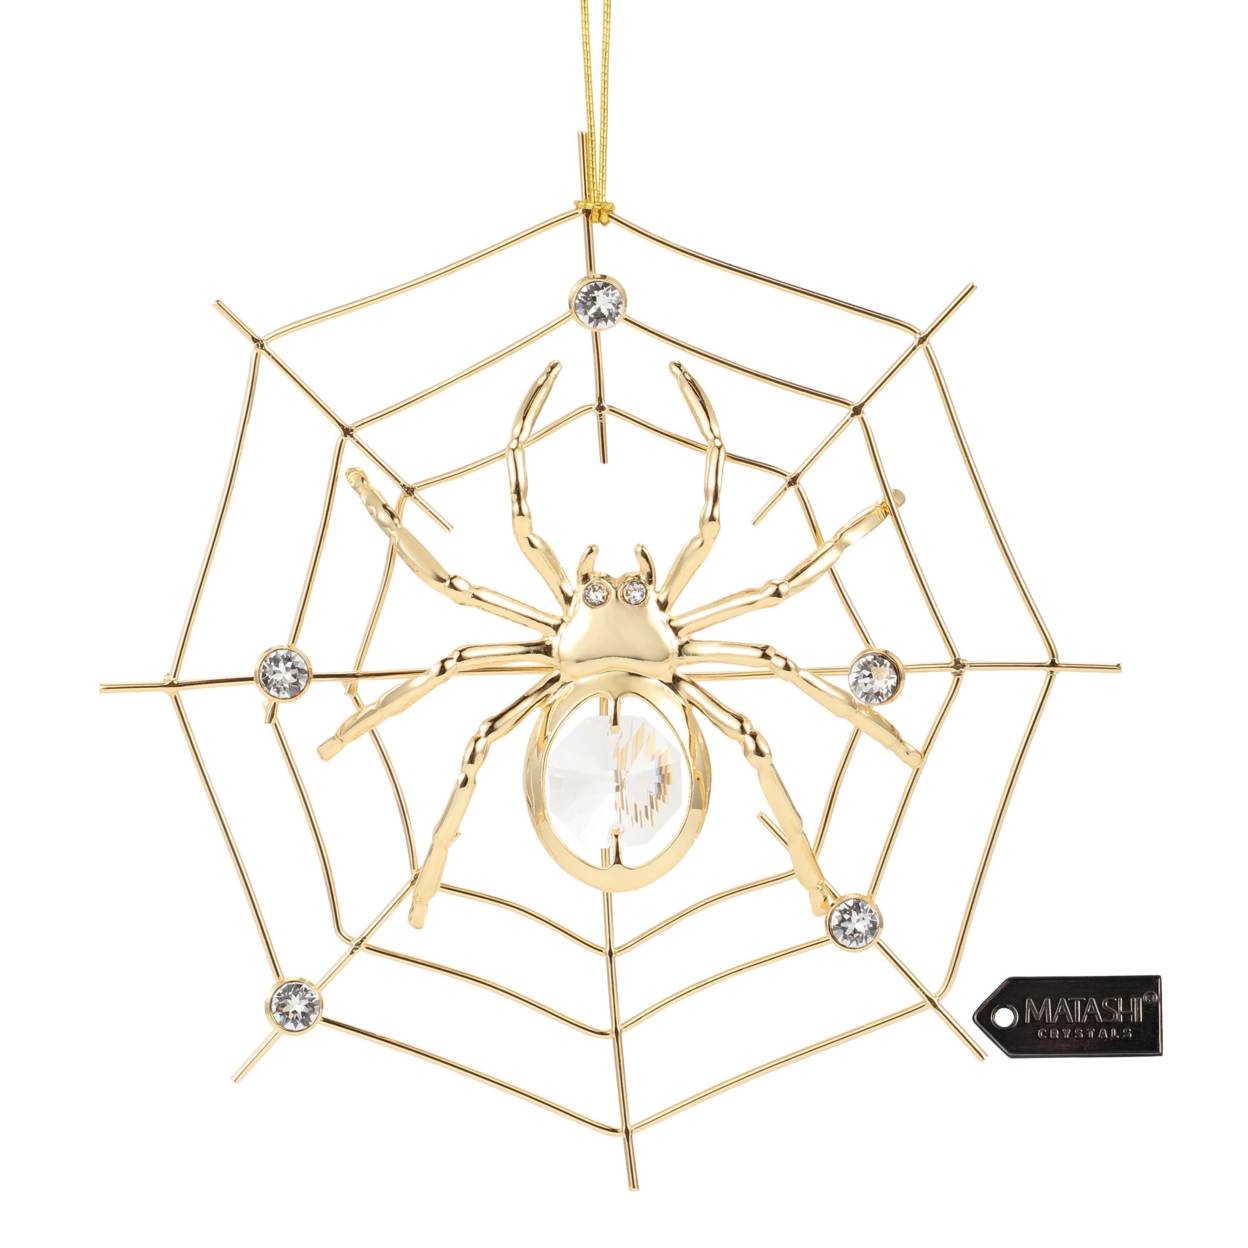 Matashi 24K Gold Plated Crystal Studded Lucky Spider Hanging Ornaments For Christmas Tree, Christmas Spider Hanging Decor For Holiday